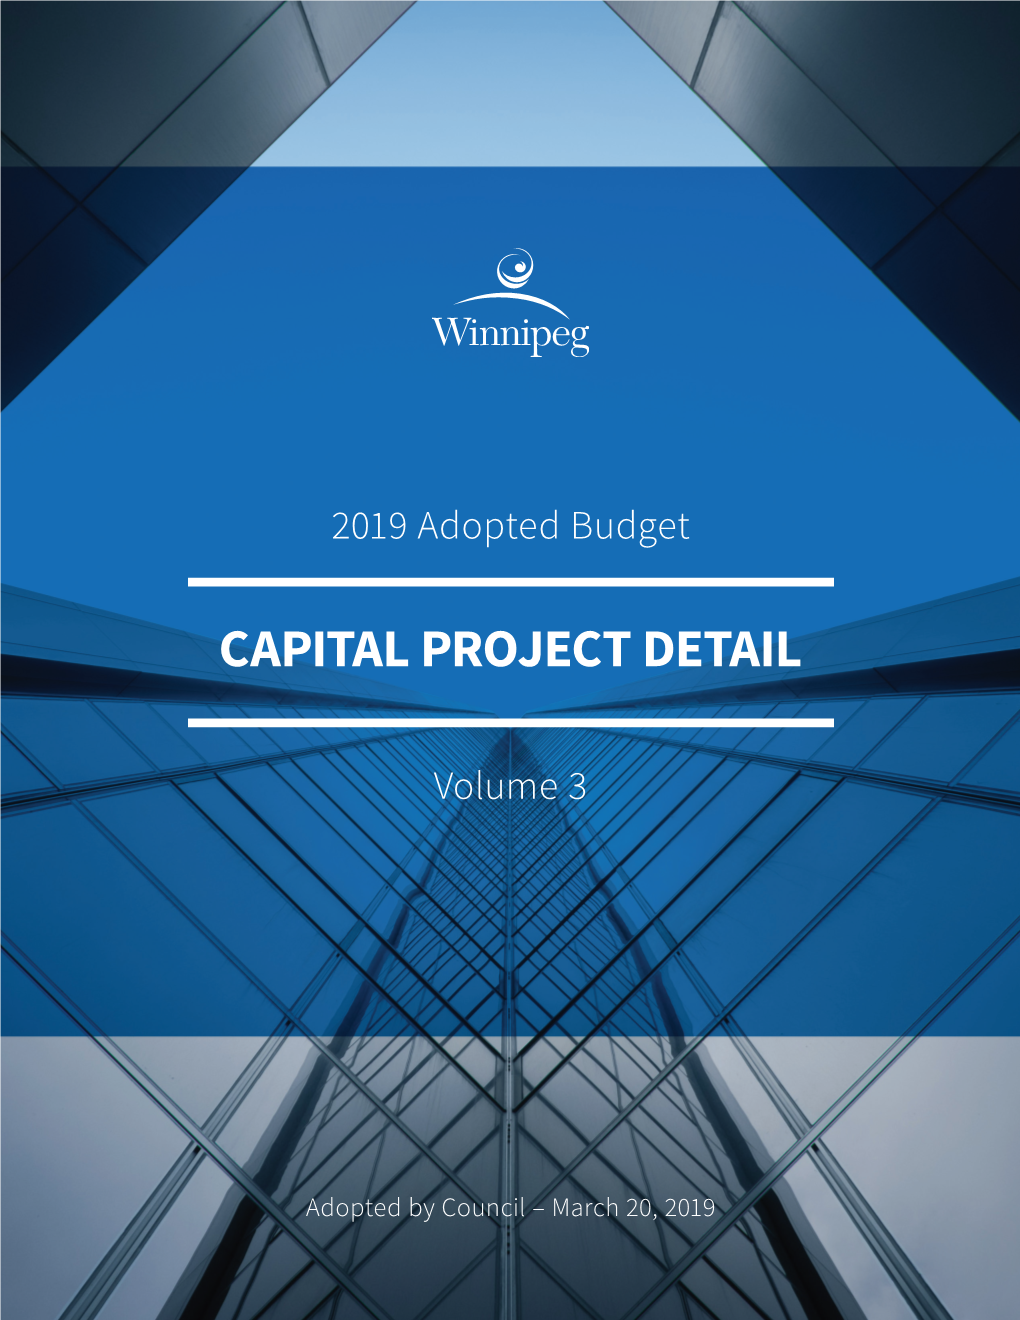 2019 Adopted Capital Budget